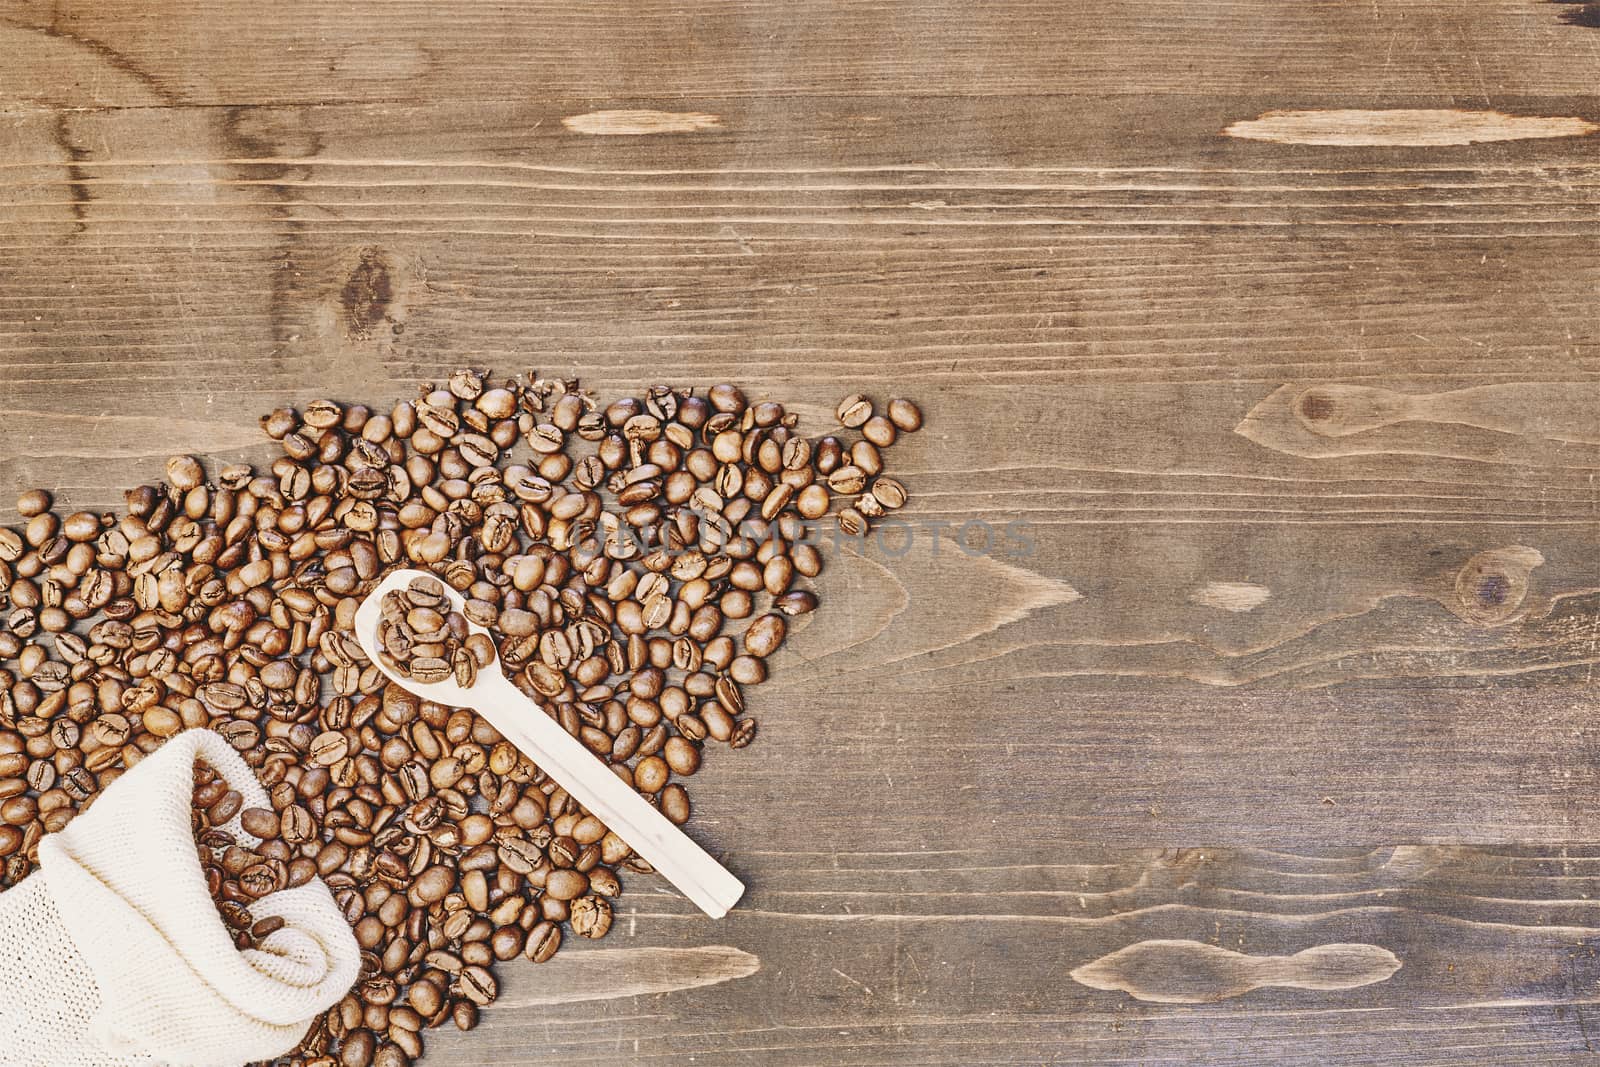 A top view of roasted coffee beans and a spoon on a wooden table under the lights